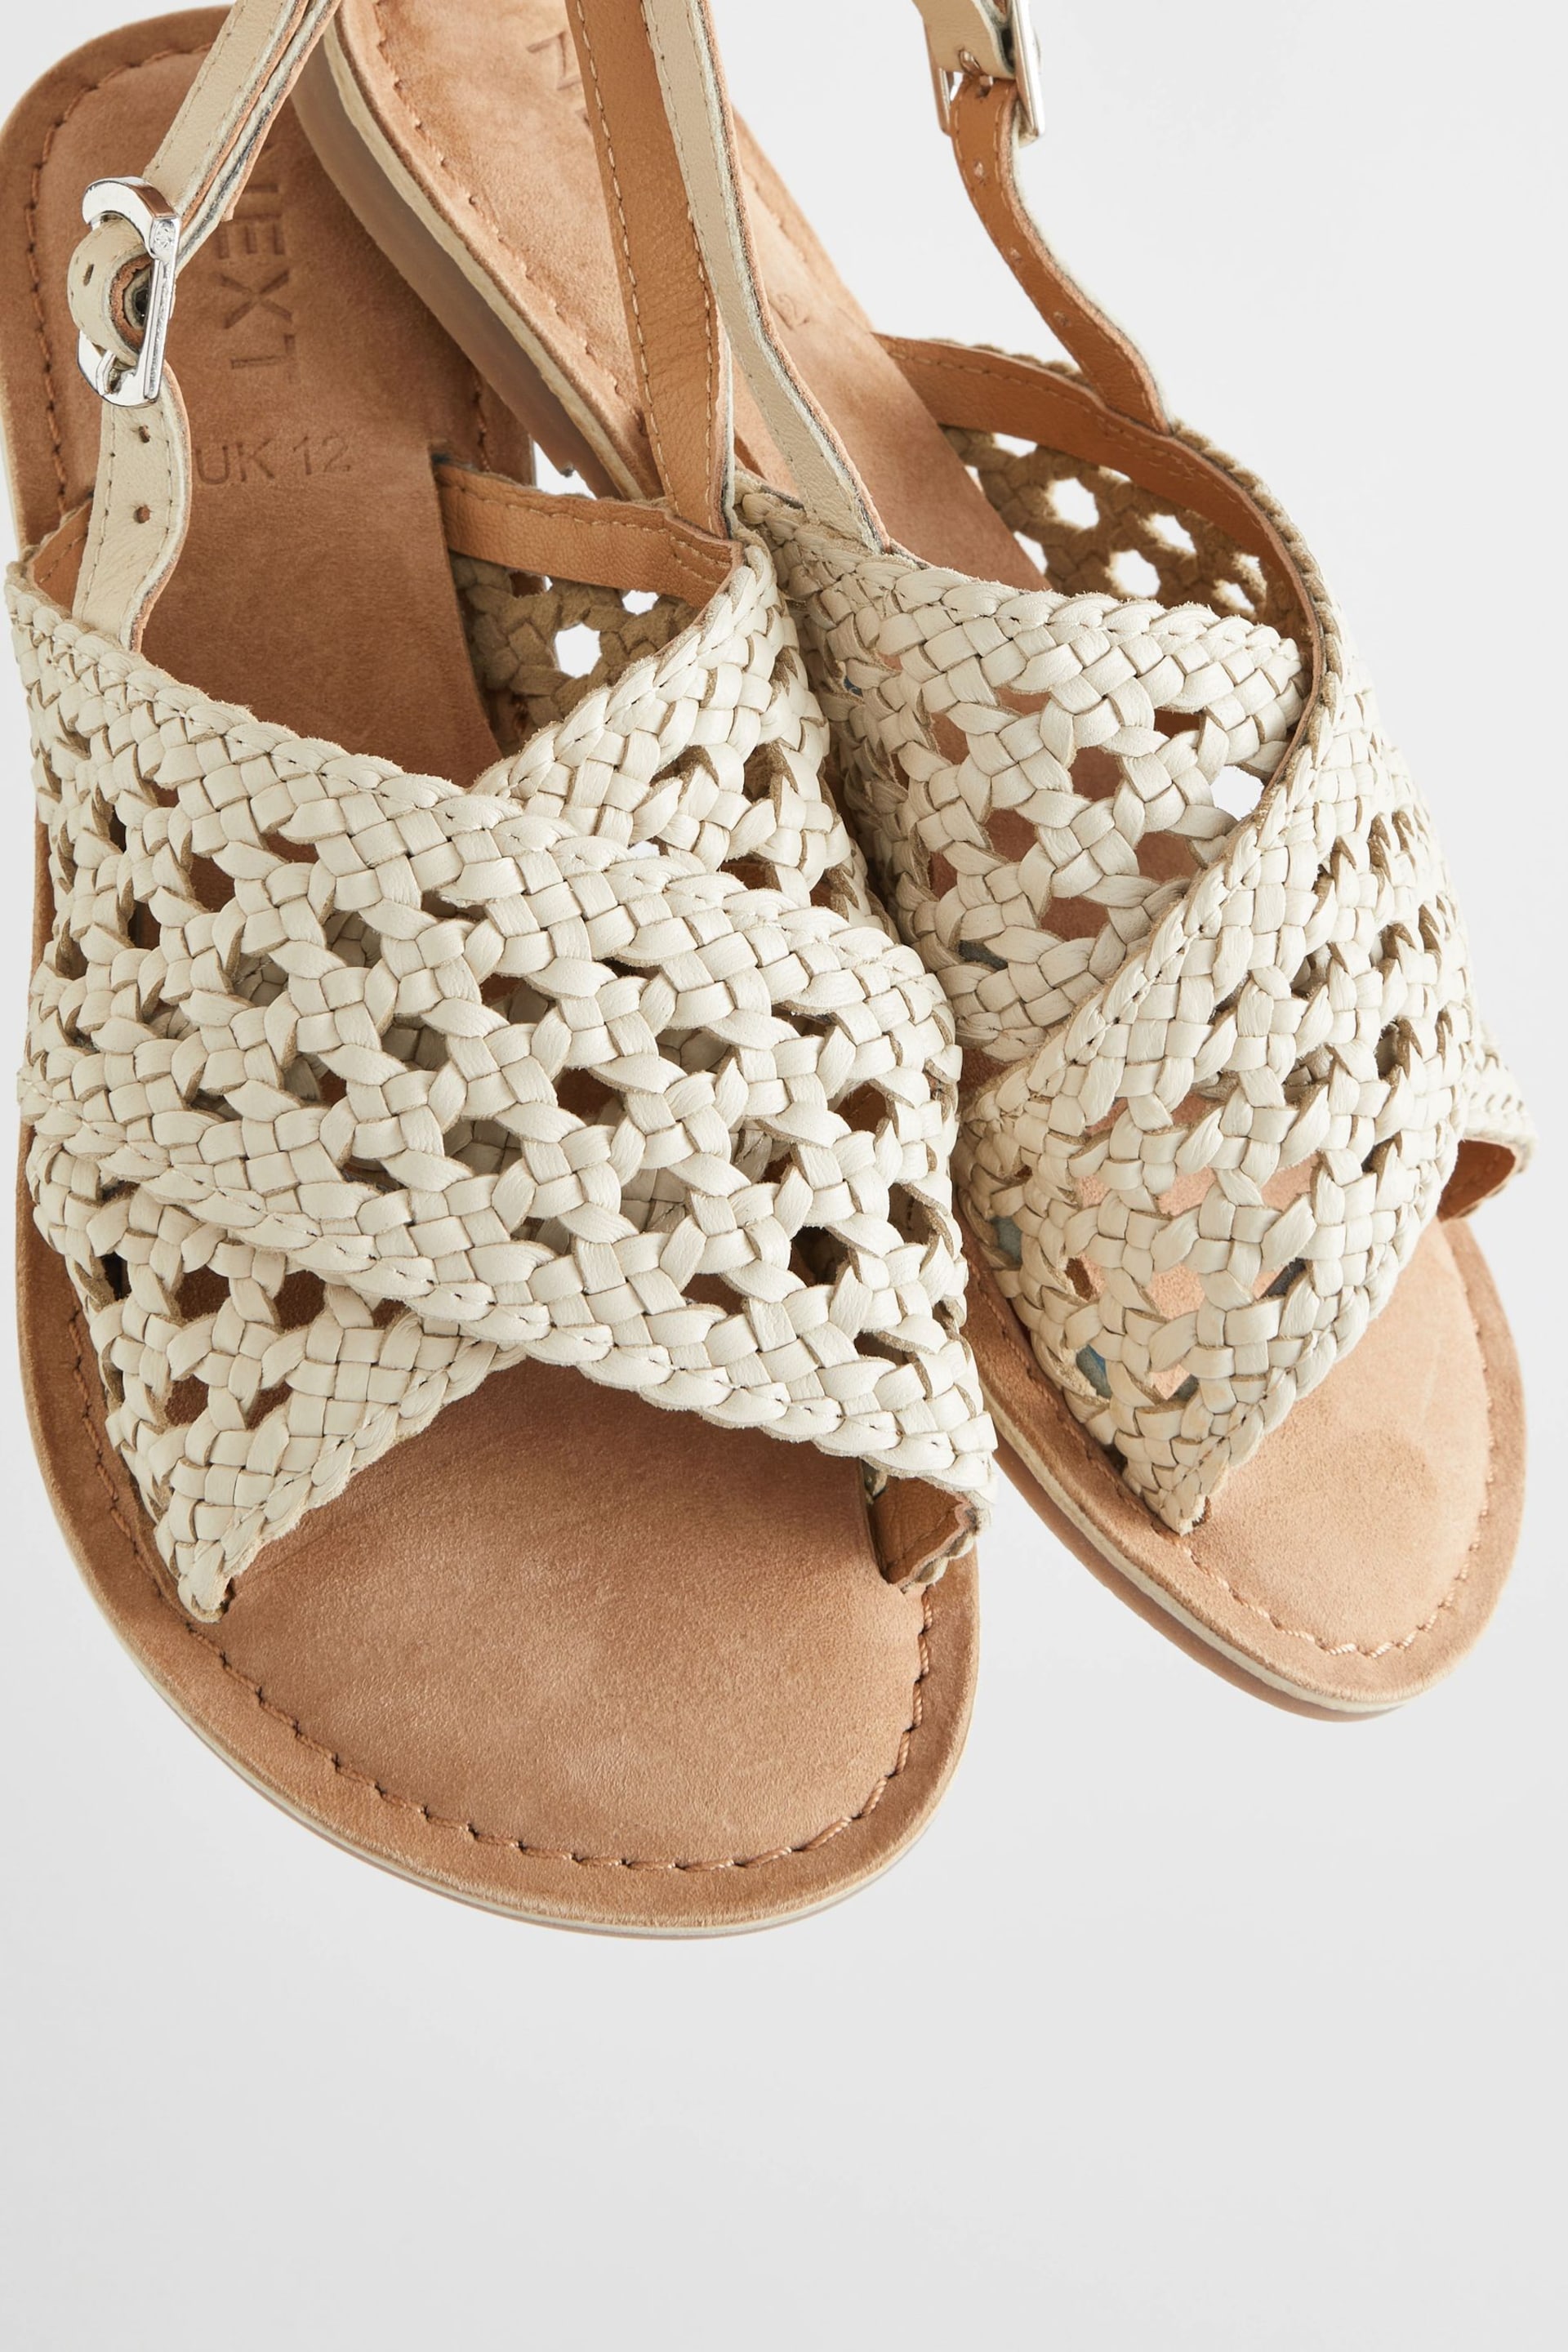 White Leather Cross Strap Sandals - Image 5 of 7